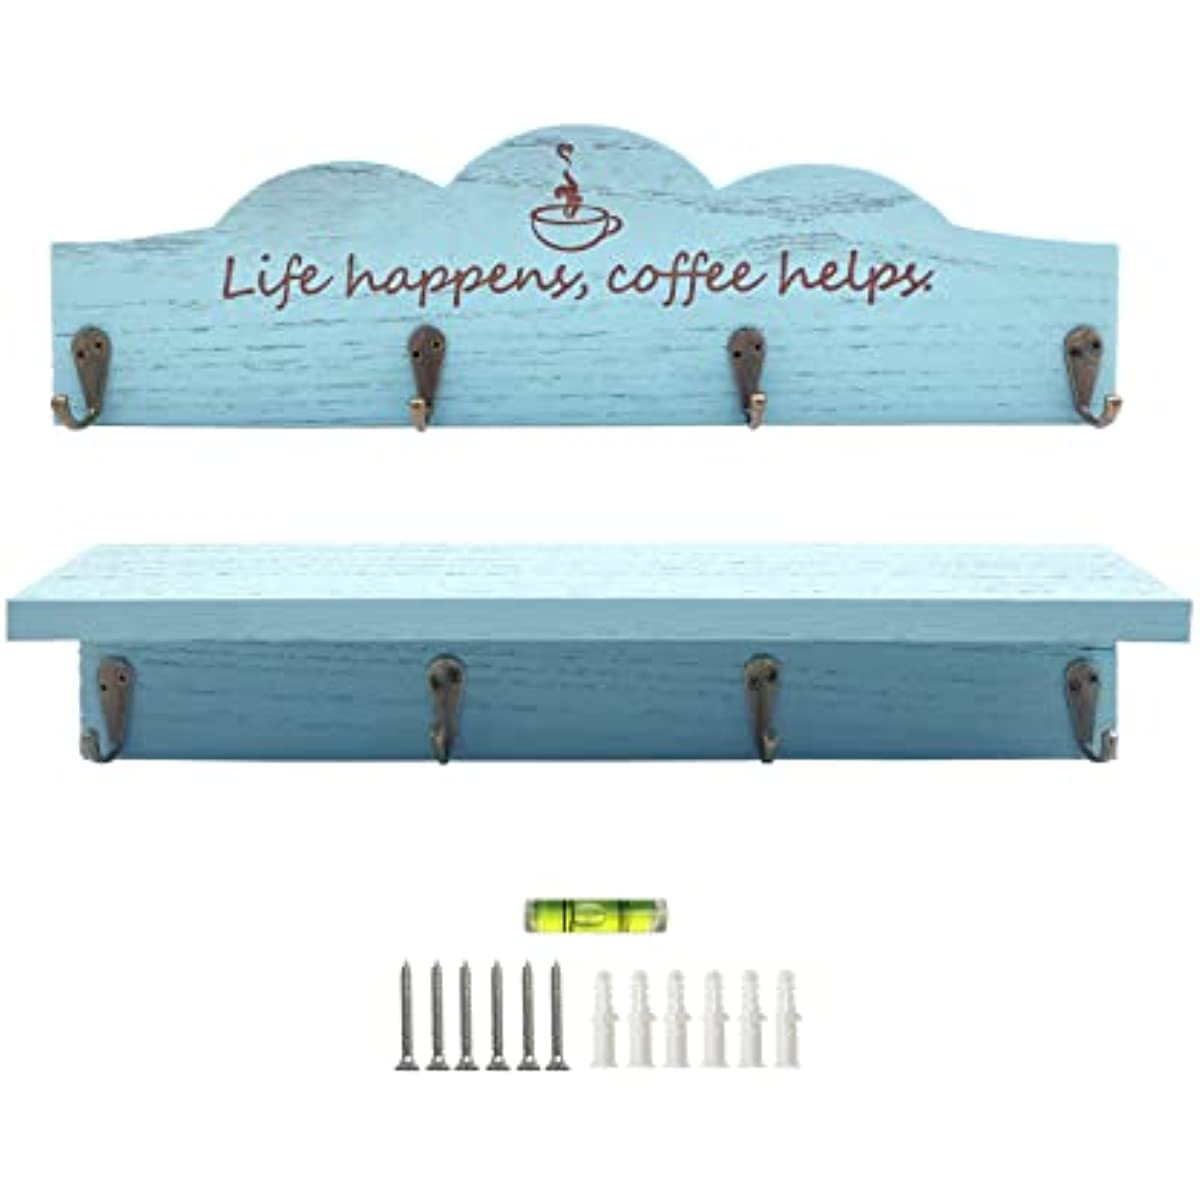 Coffee Cup Holder / Kitchen Decor / Coffee Bar Decor / Coffee Bar / Coffee  Cup Holder for Wall / Coffee Bar Accessories / Shelf With Hooks 